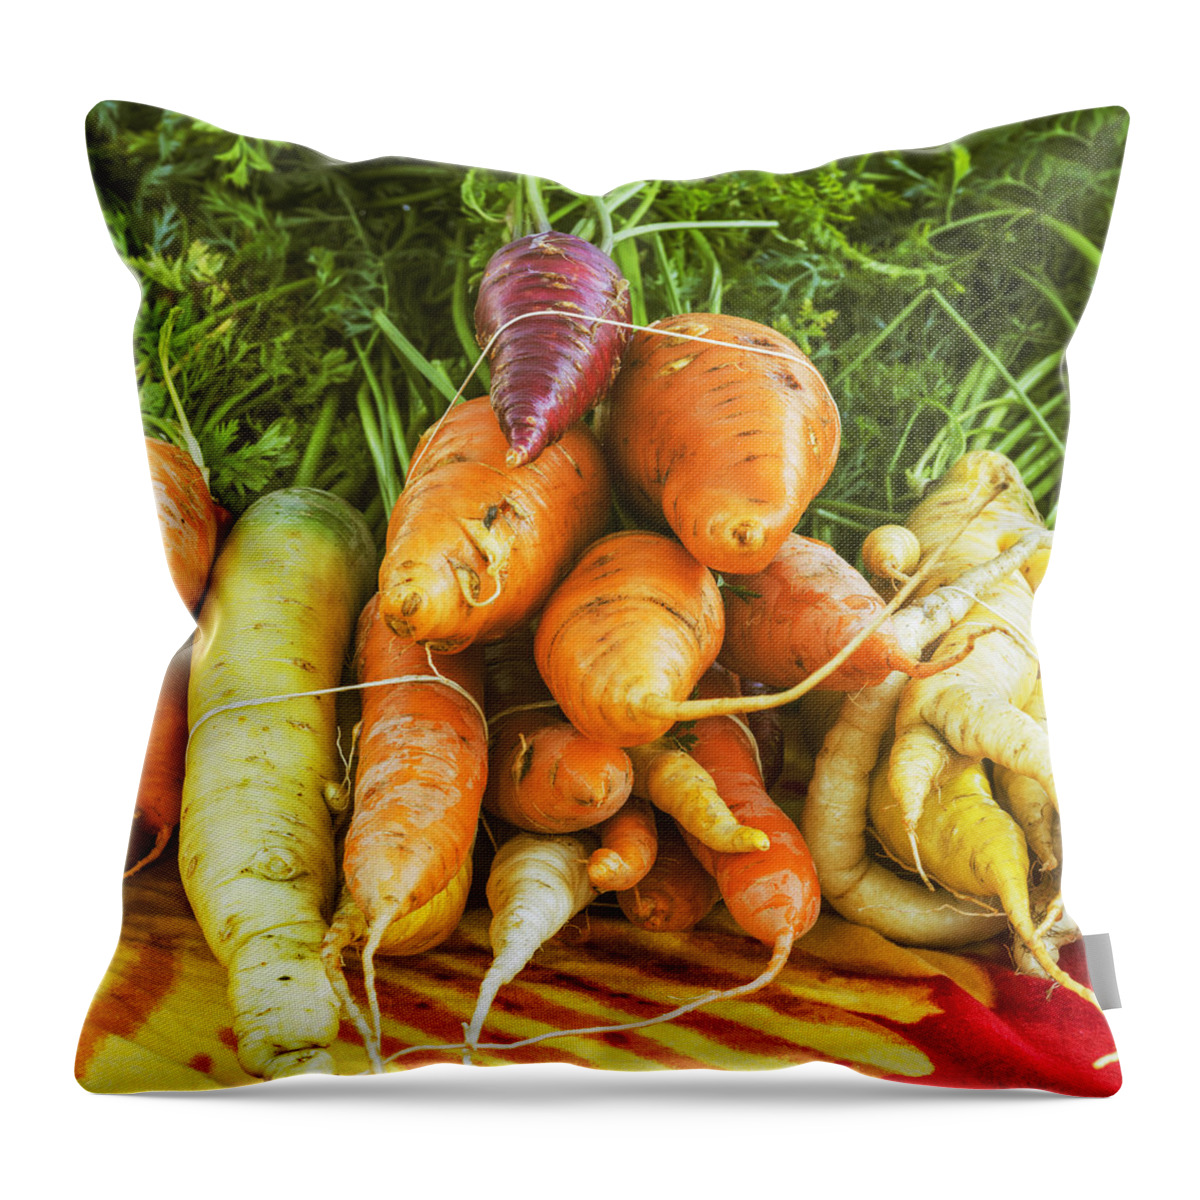 Carrots Throw Pillow featuring the photograph Fresh Carrots by Vishwanath Bhat